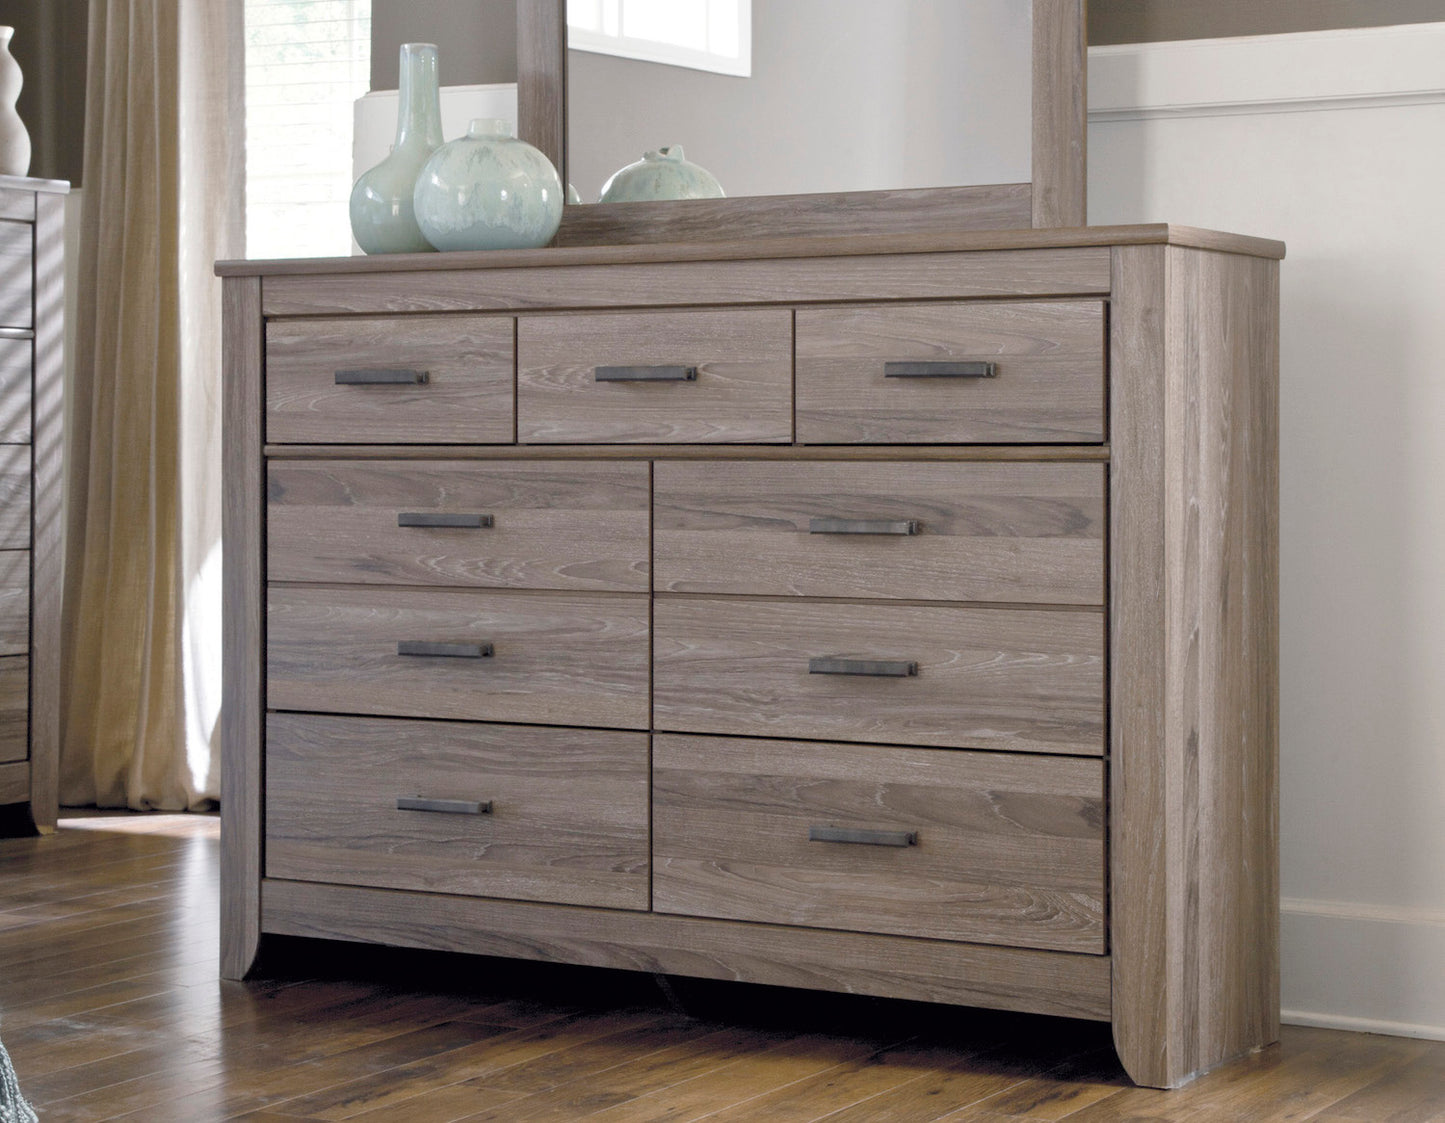 Ashley Zelen Seven Drawers Of Dresser In Warm Gray - The Furniture Space.